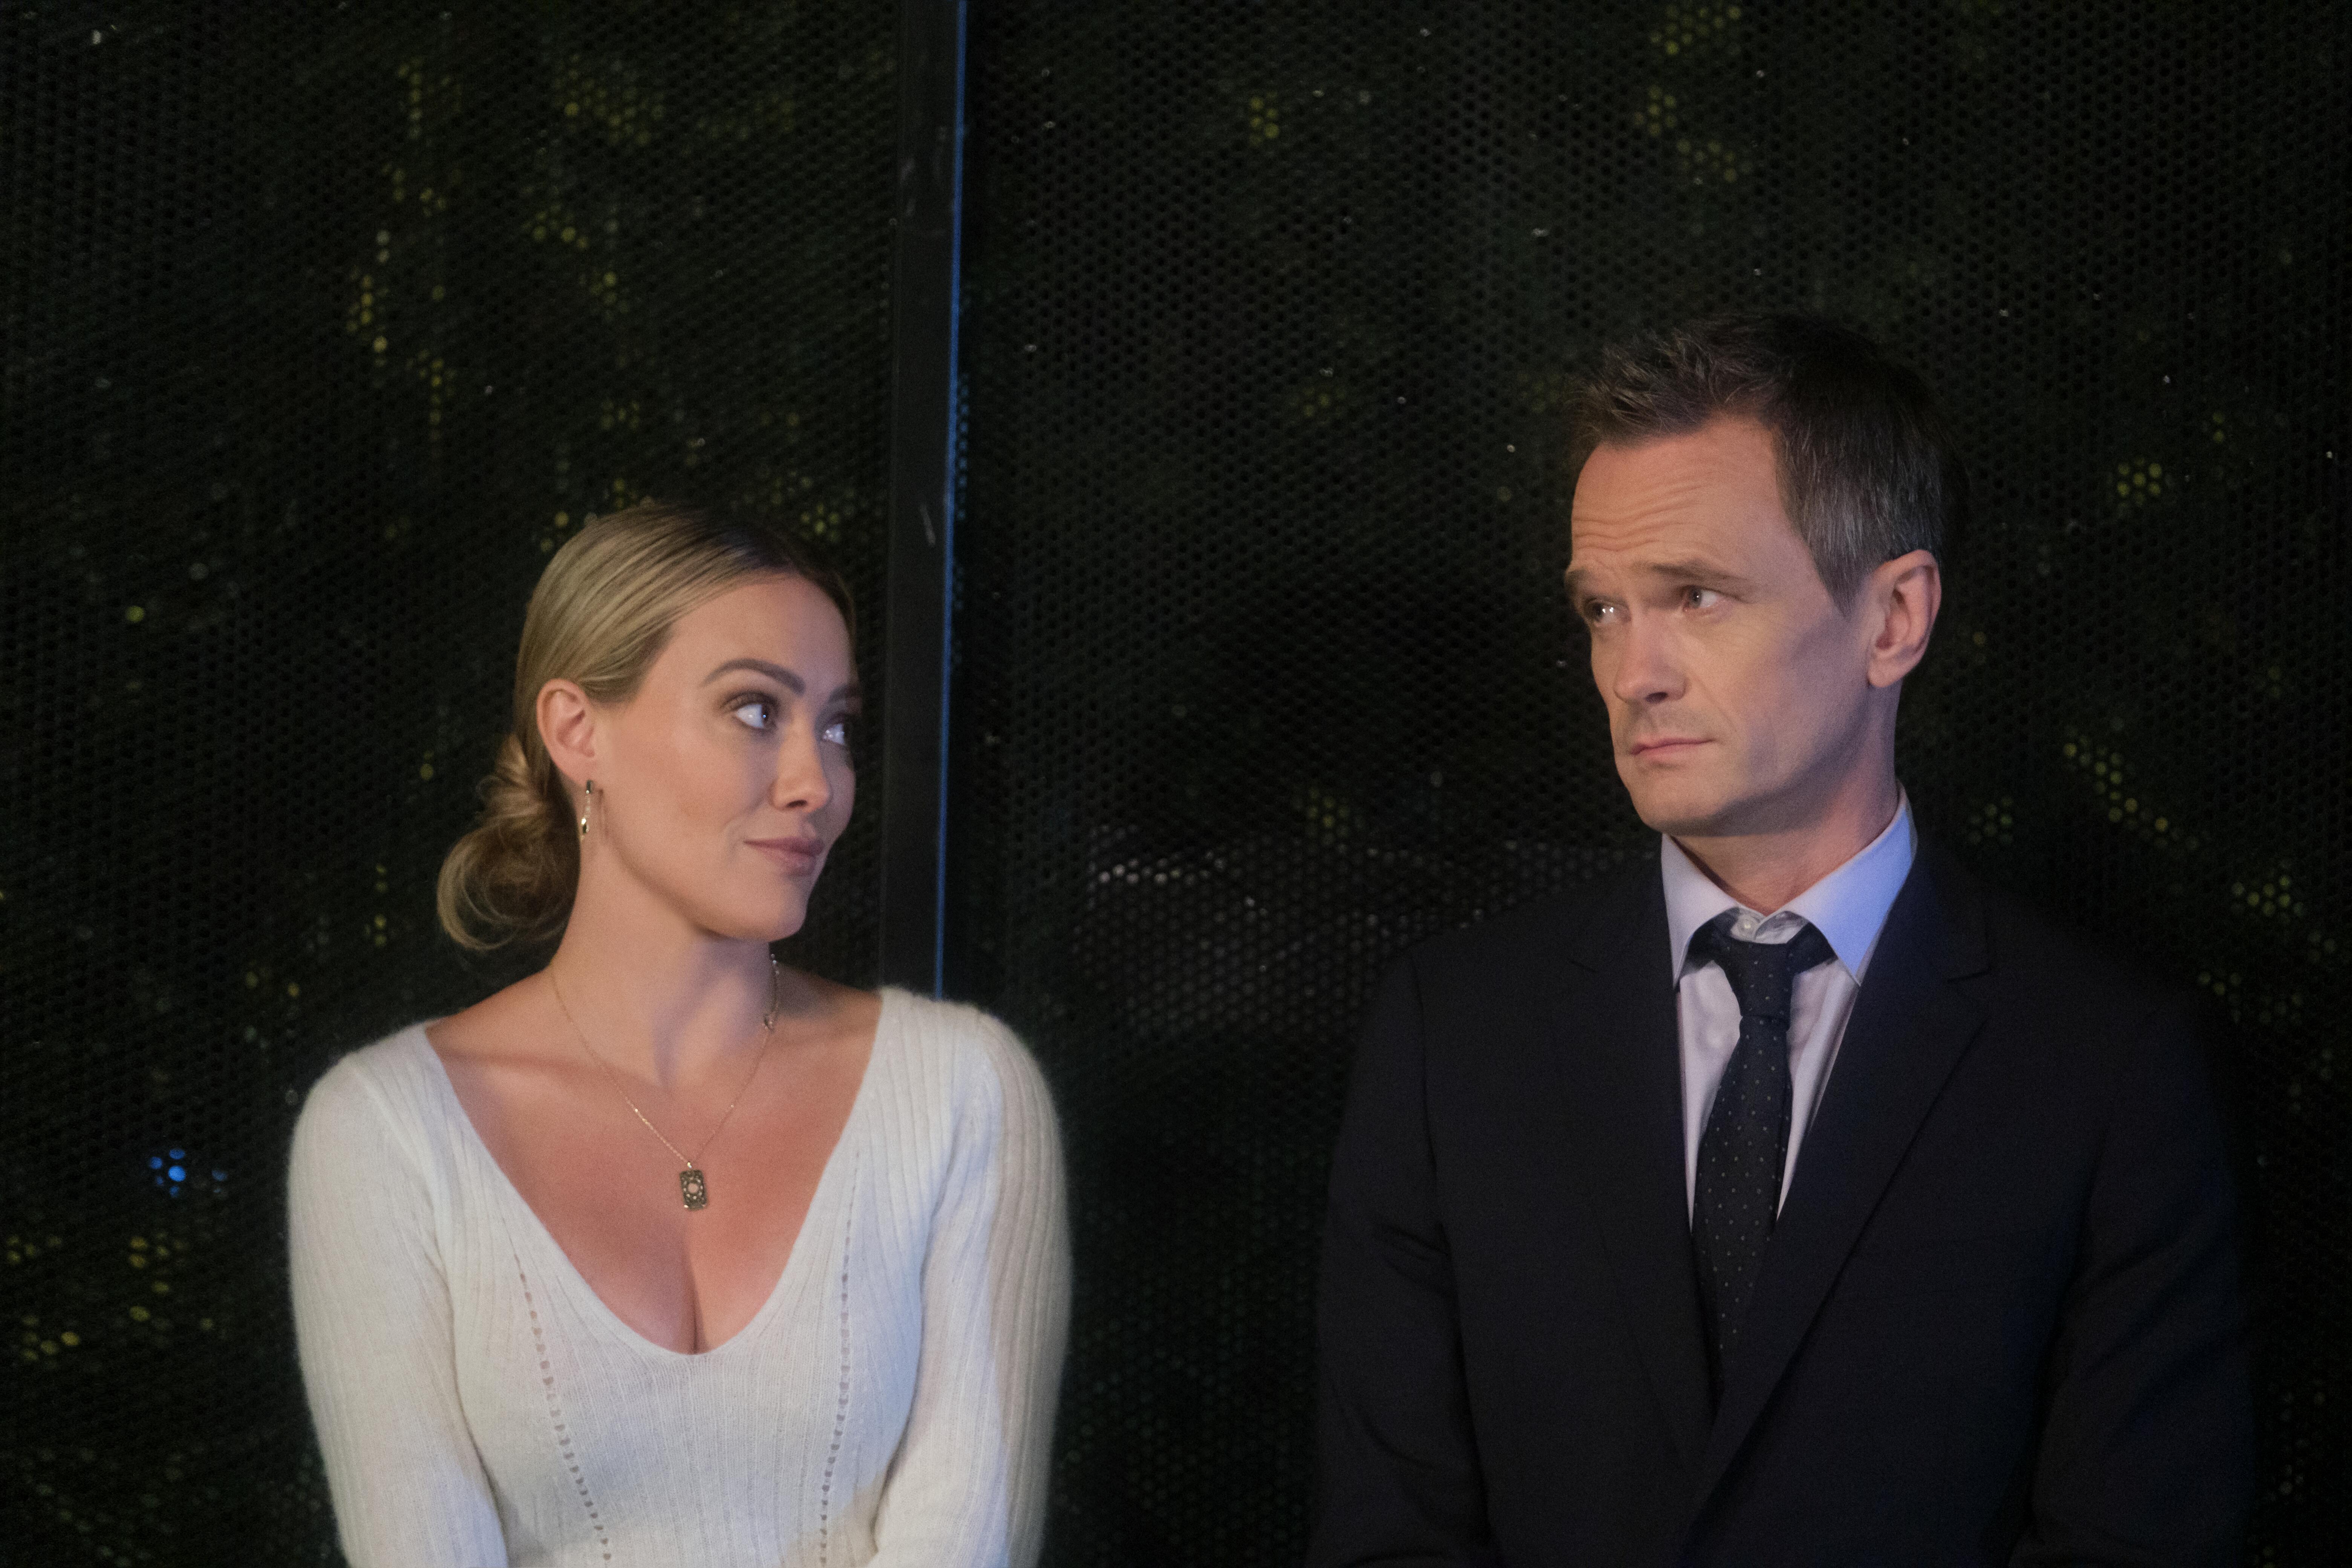 Hilary Duff and Neil Patrick Harris on ‘How I Met Your Father’